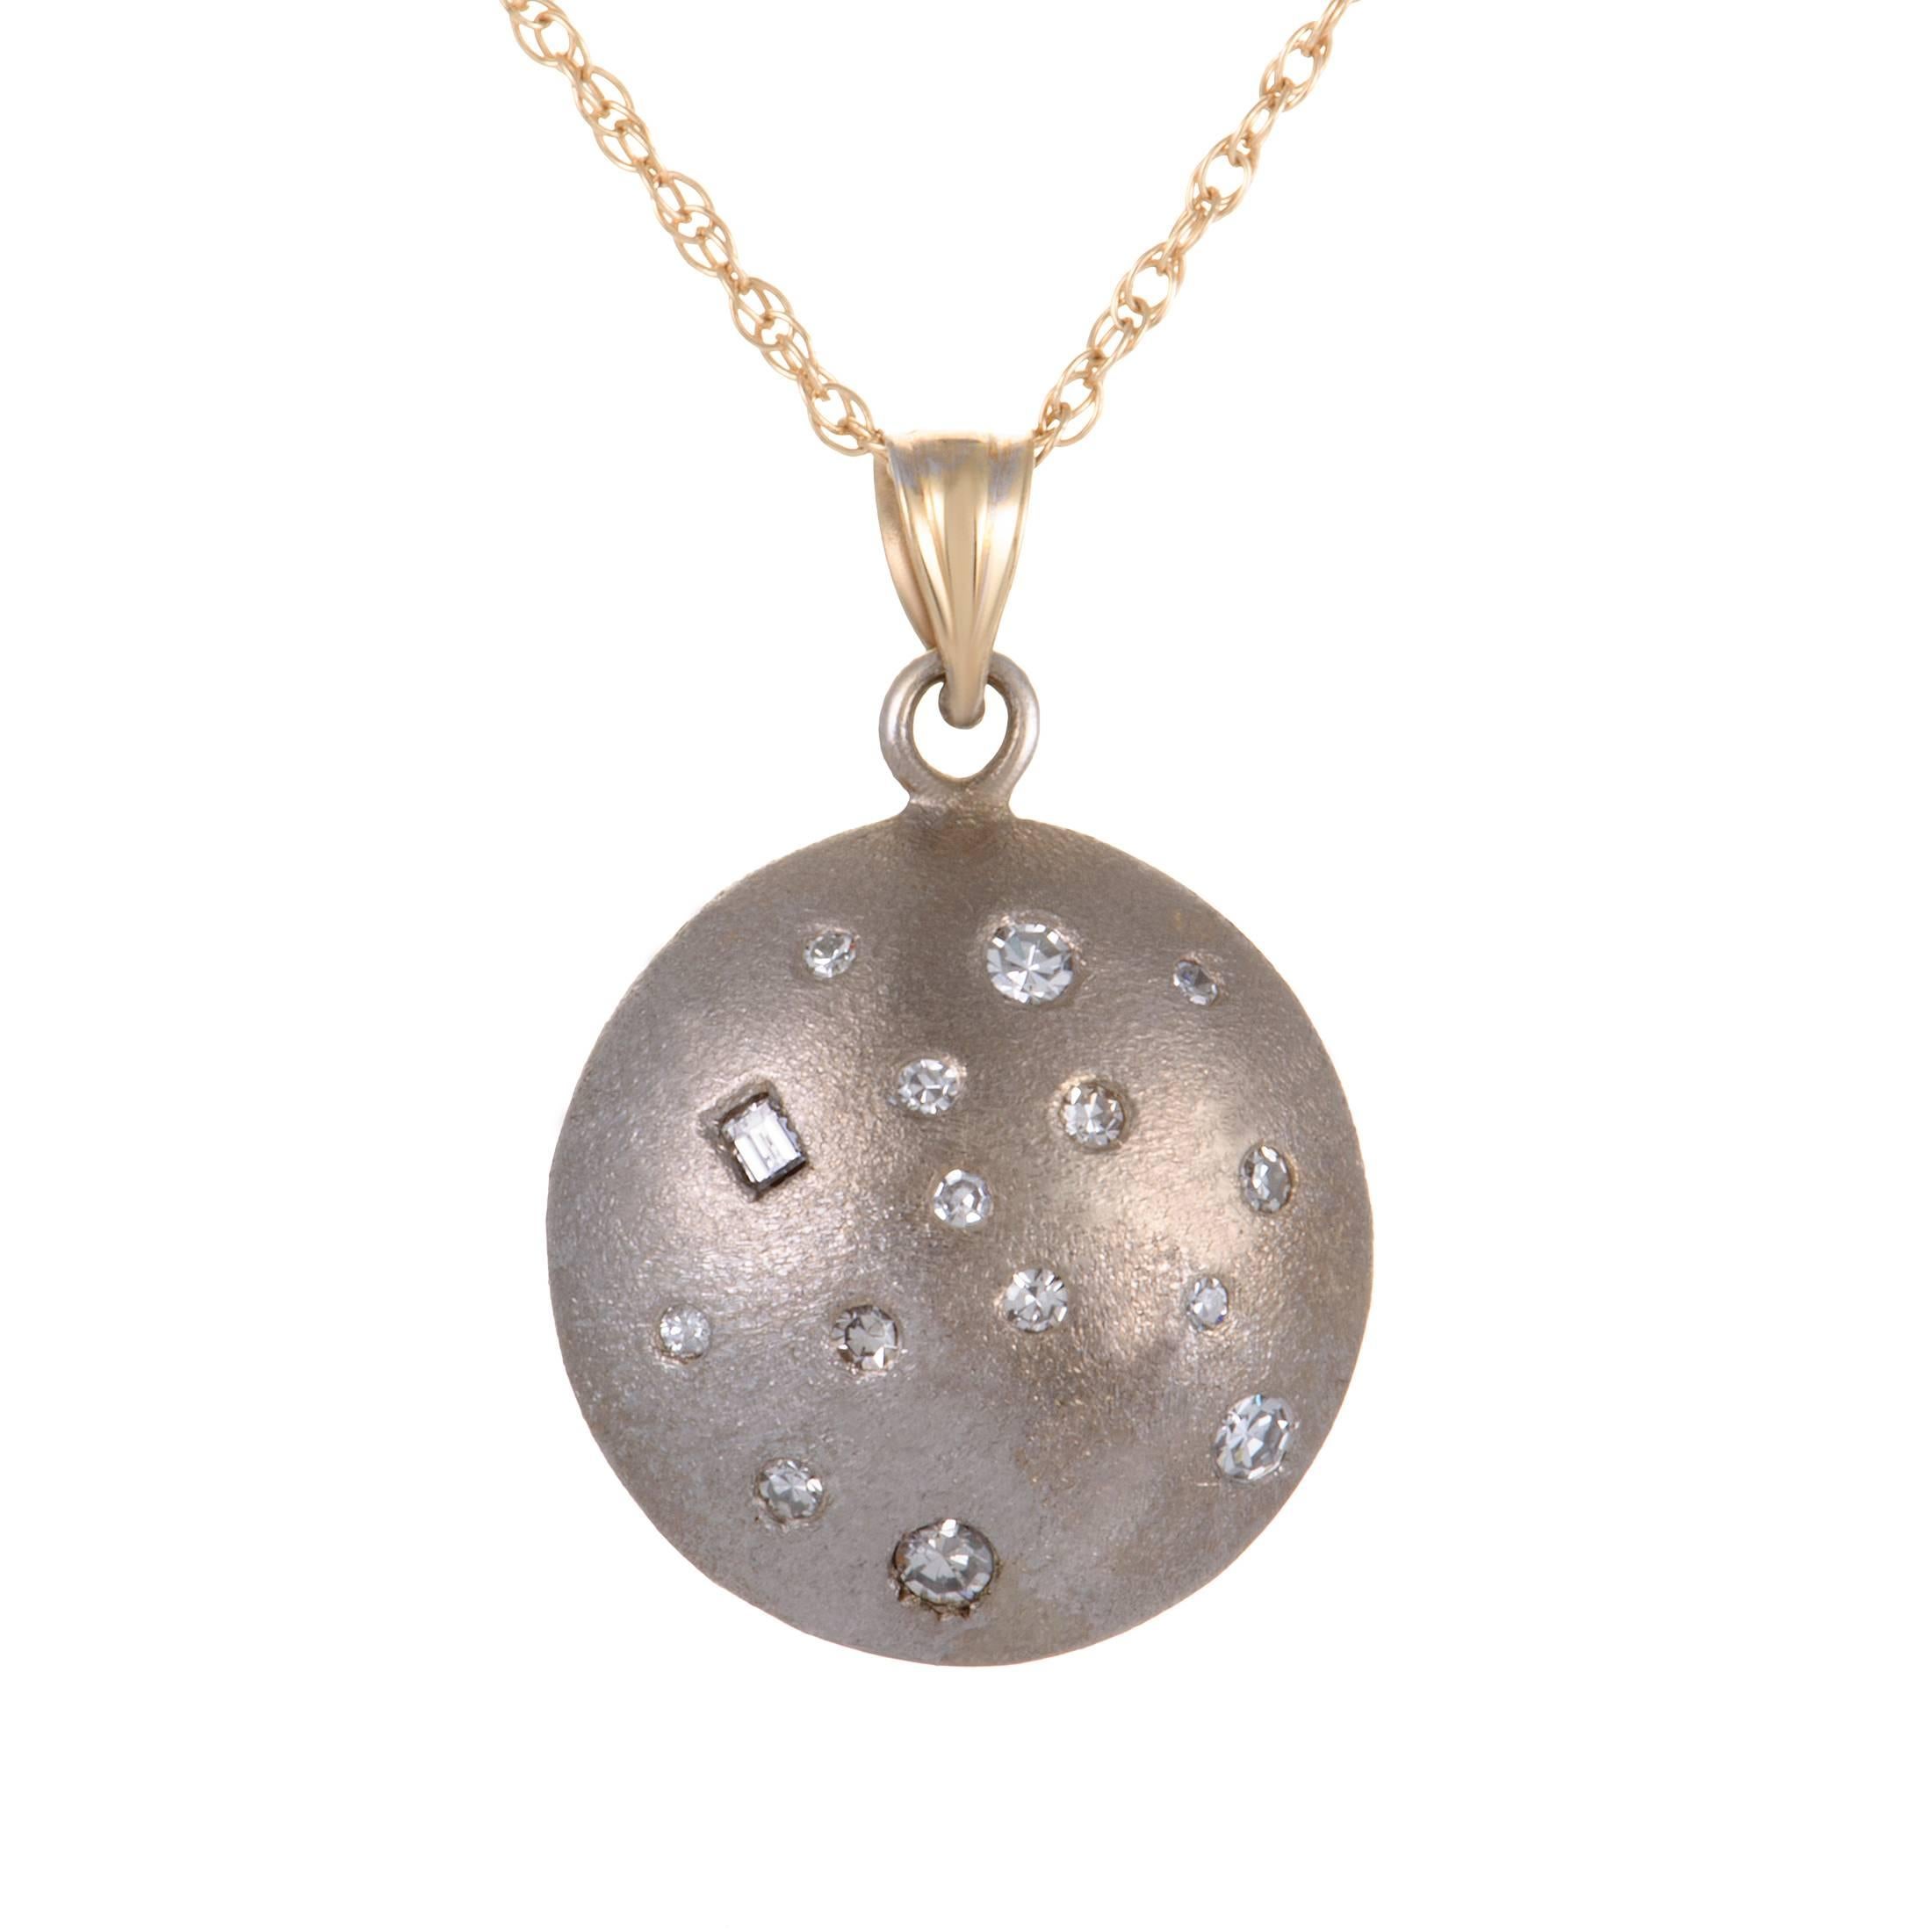 Featuring a pendant that can be worn on both sides, this extraordinary necklace offers both an elegantly gleaming look, as well as a slightly subdued, understated rhodium-accented one. The necklace is made of 18K yellow gold and boasts a total of